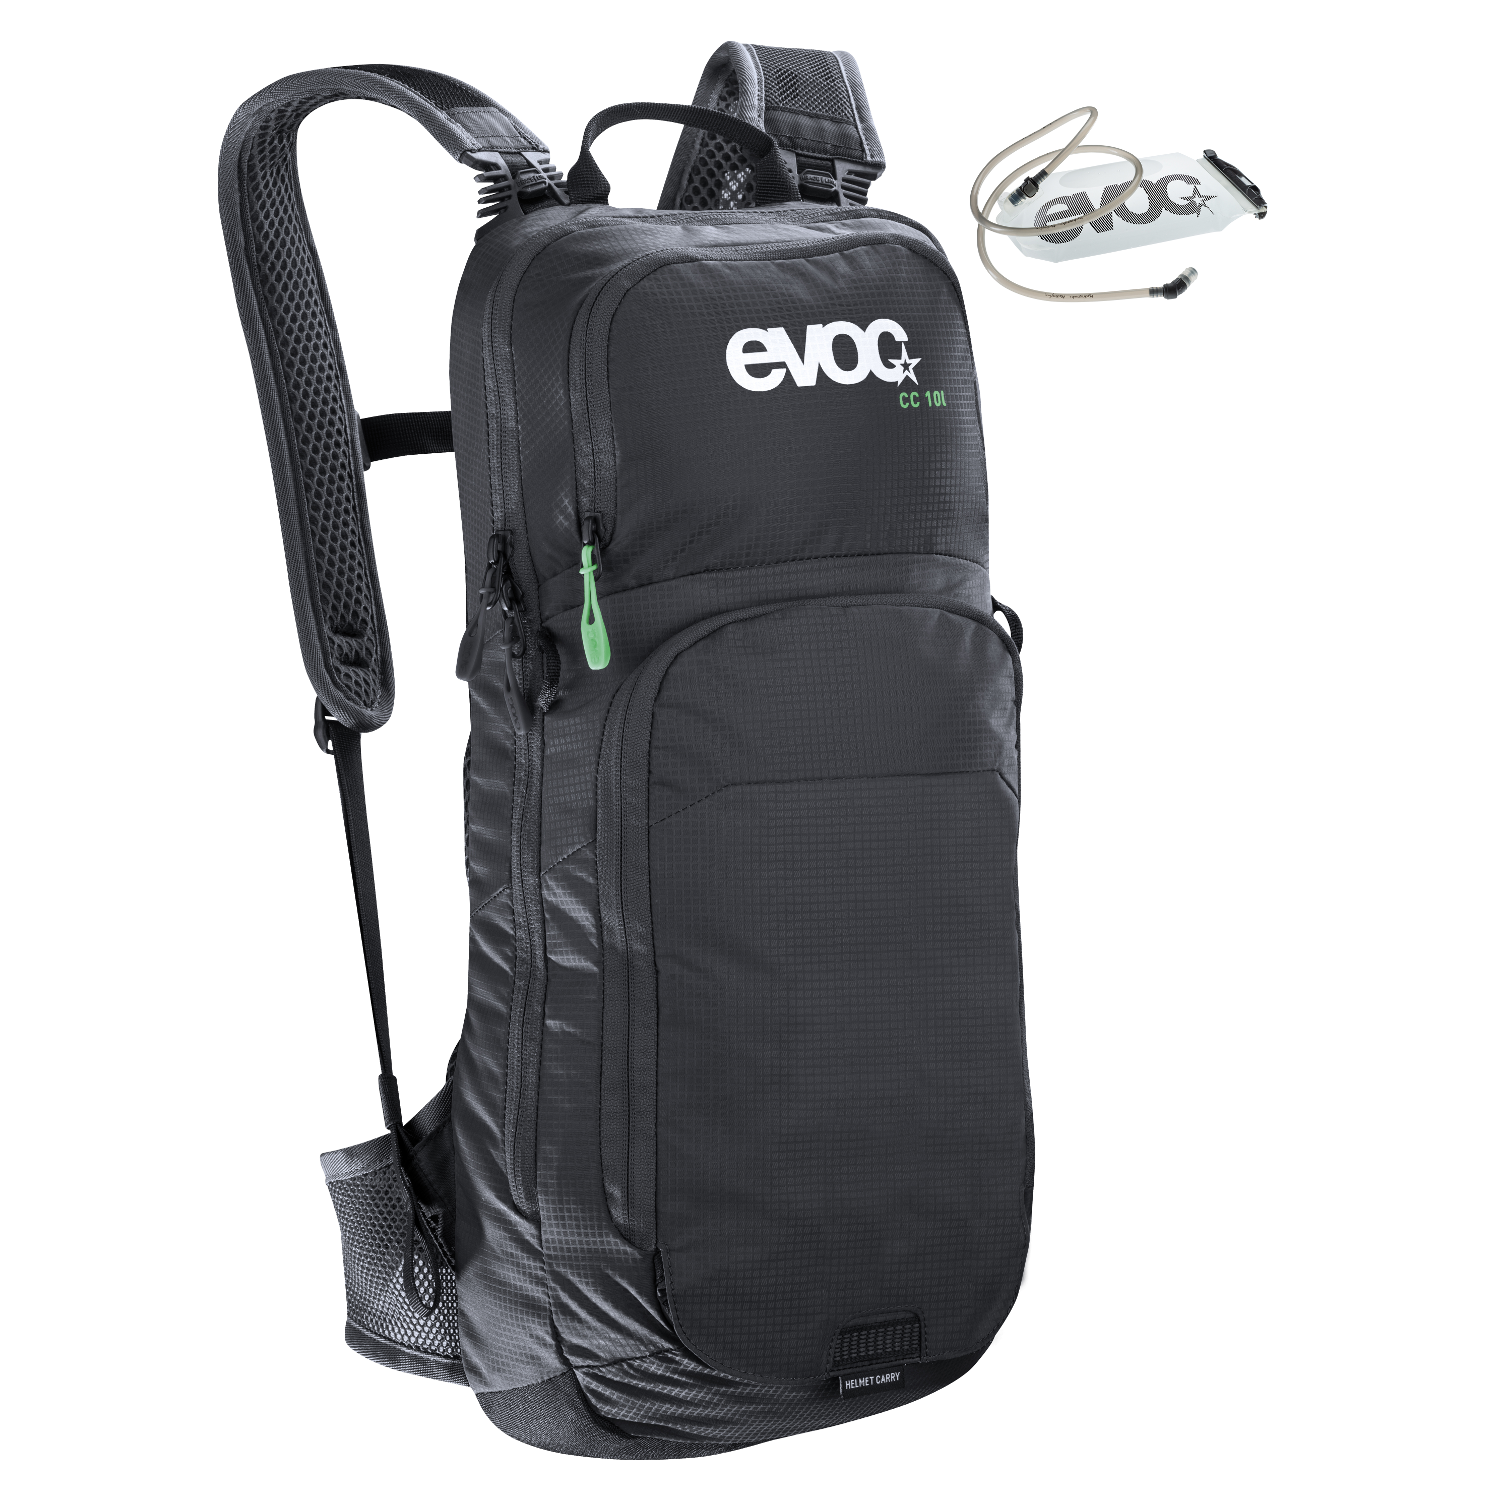 Evoc Backpack with Hydration System Cross Country Black, 10 + 2 Liter